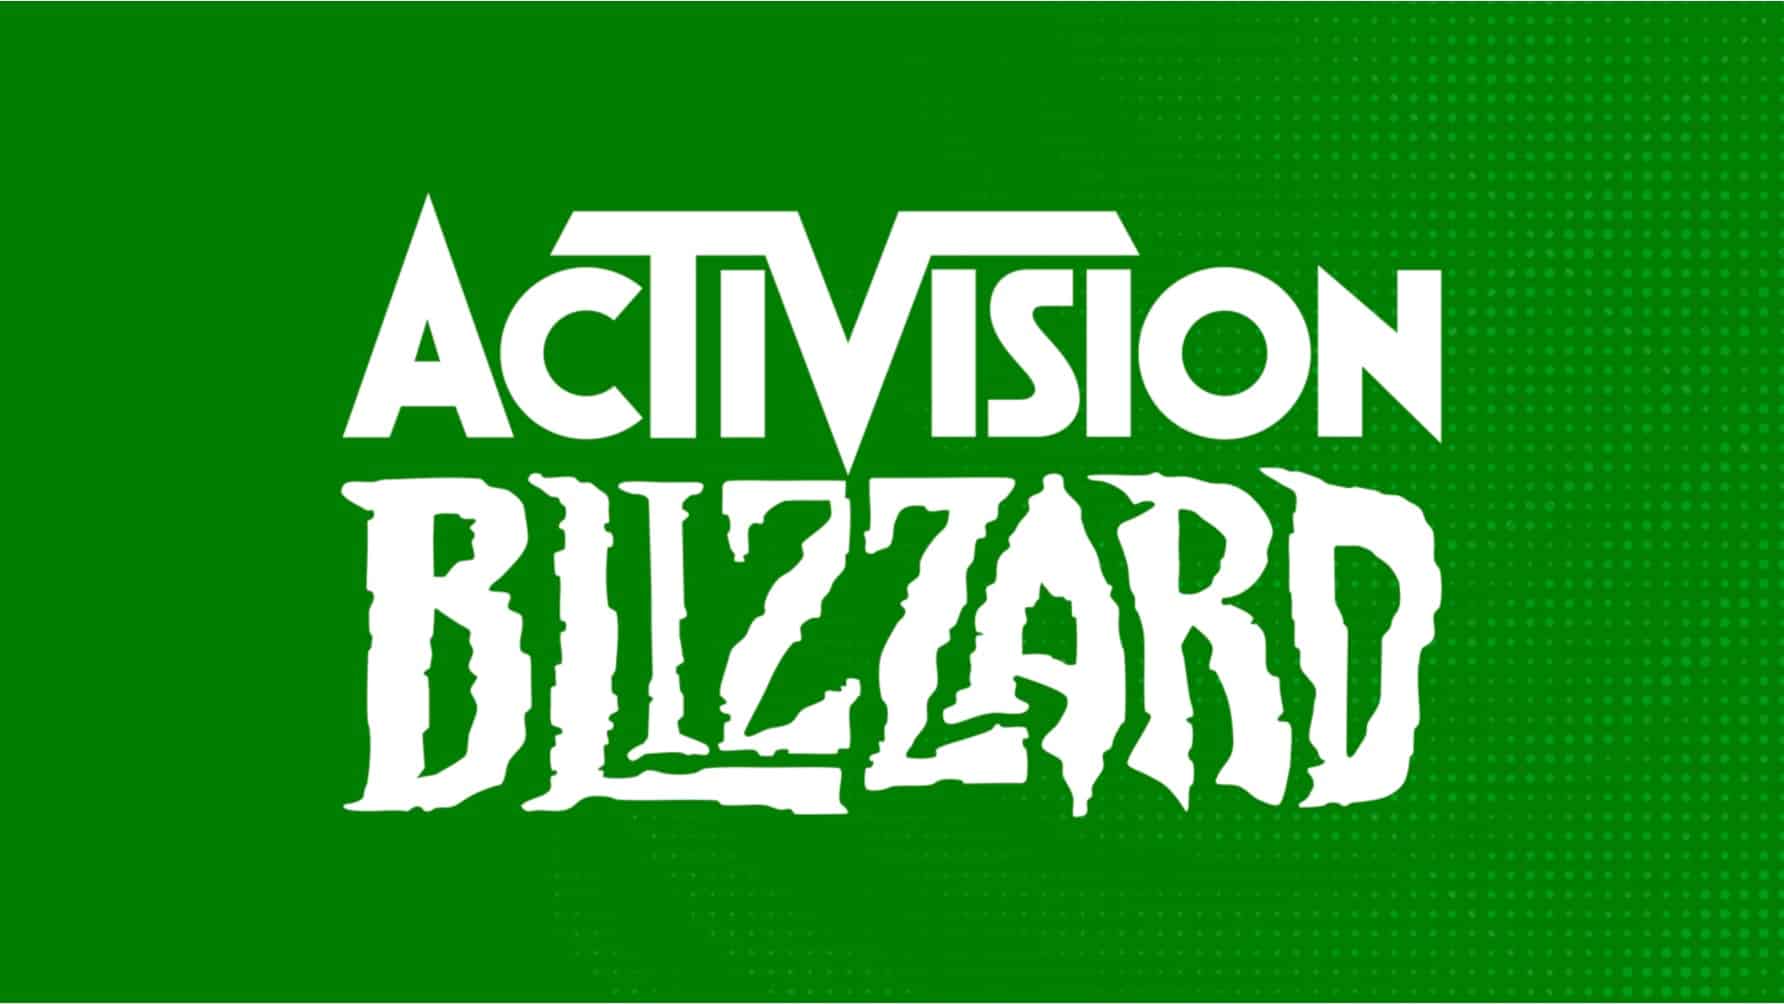 Microsoft Acquires Activision Blizzard for $69B to Play key role in  Metaverse Development